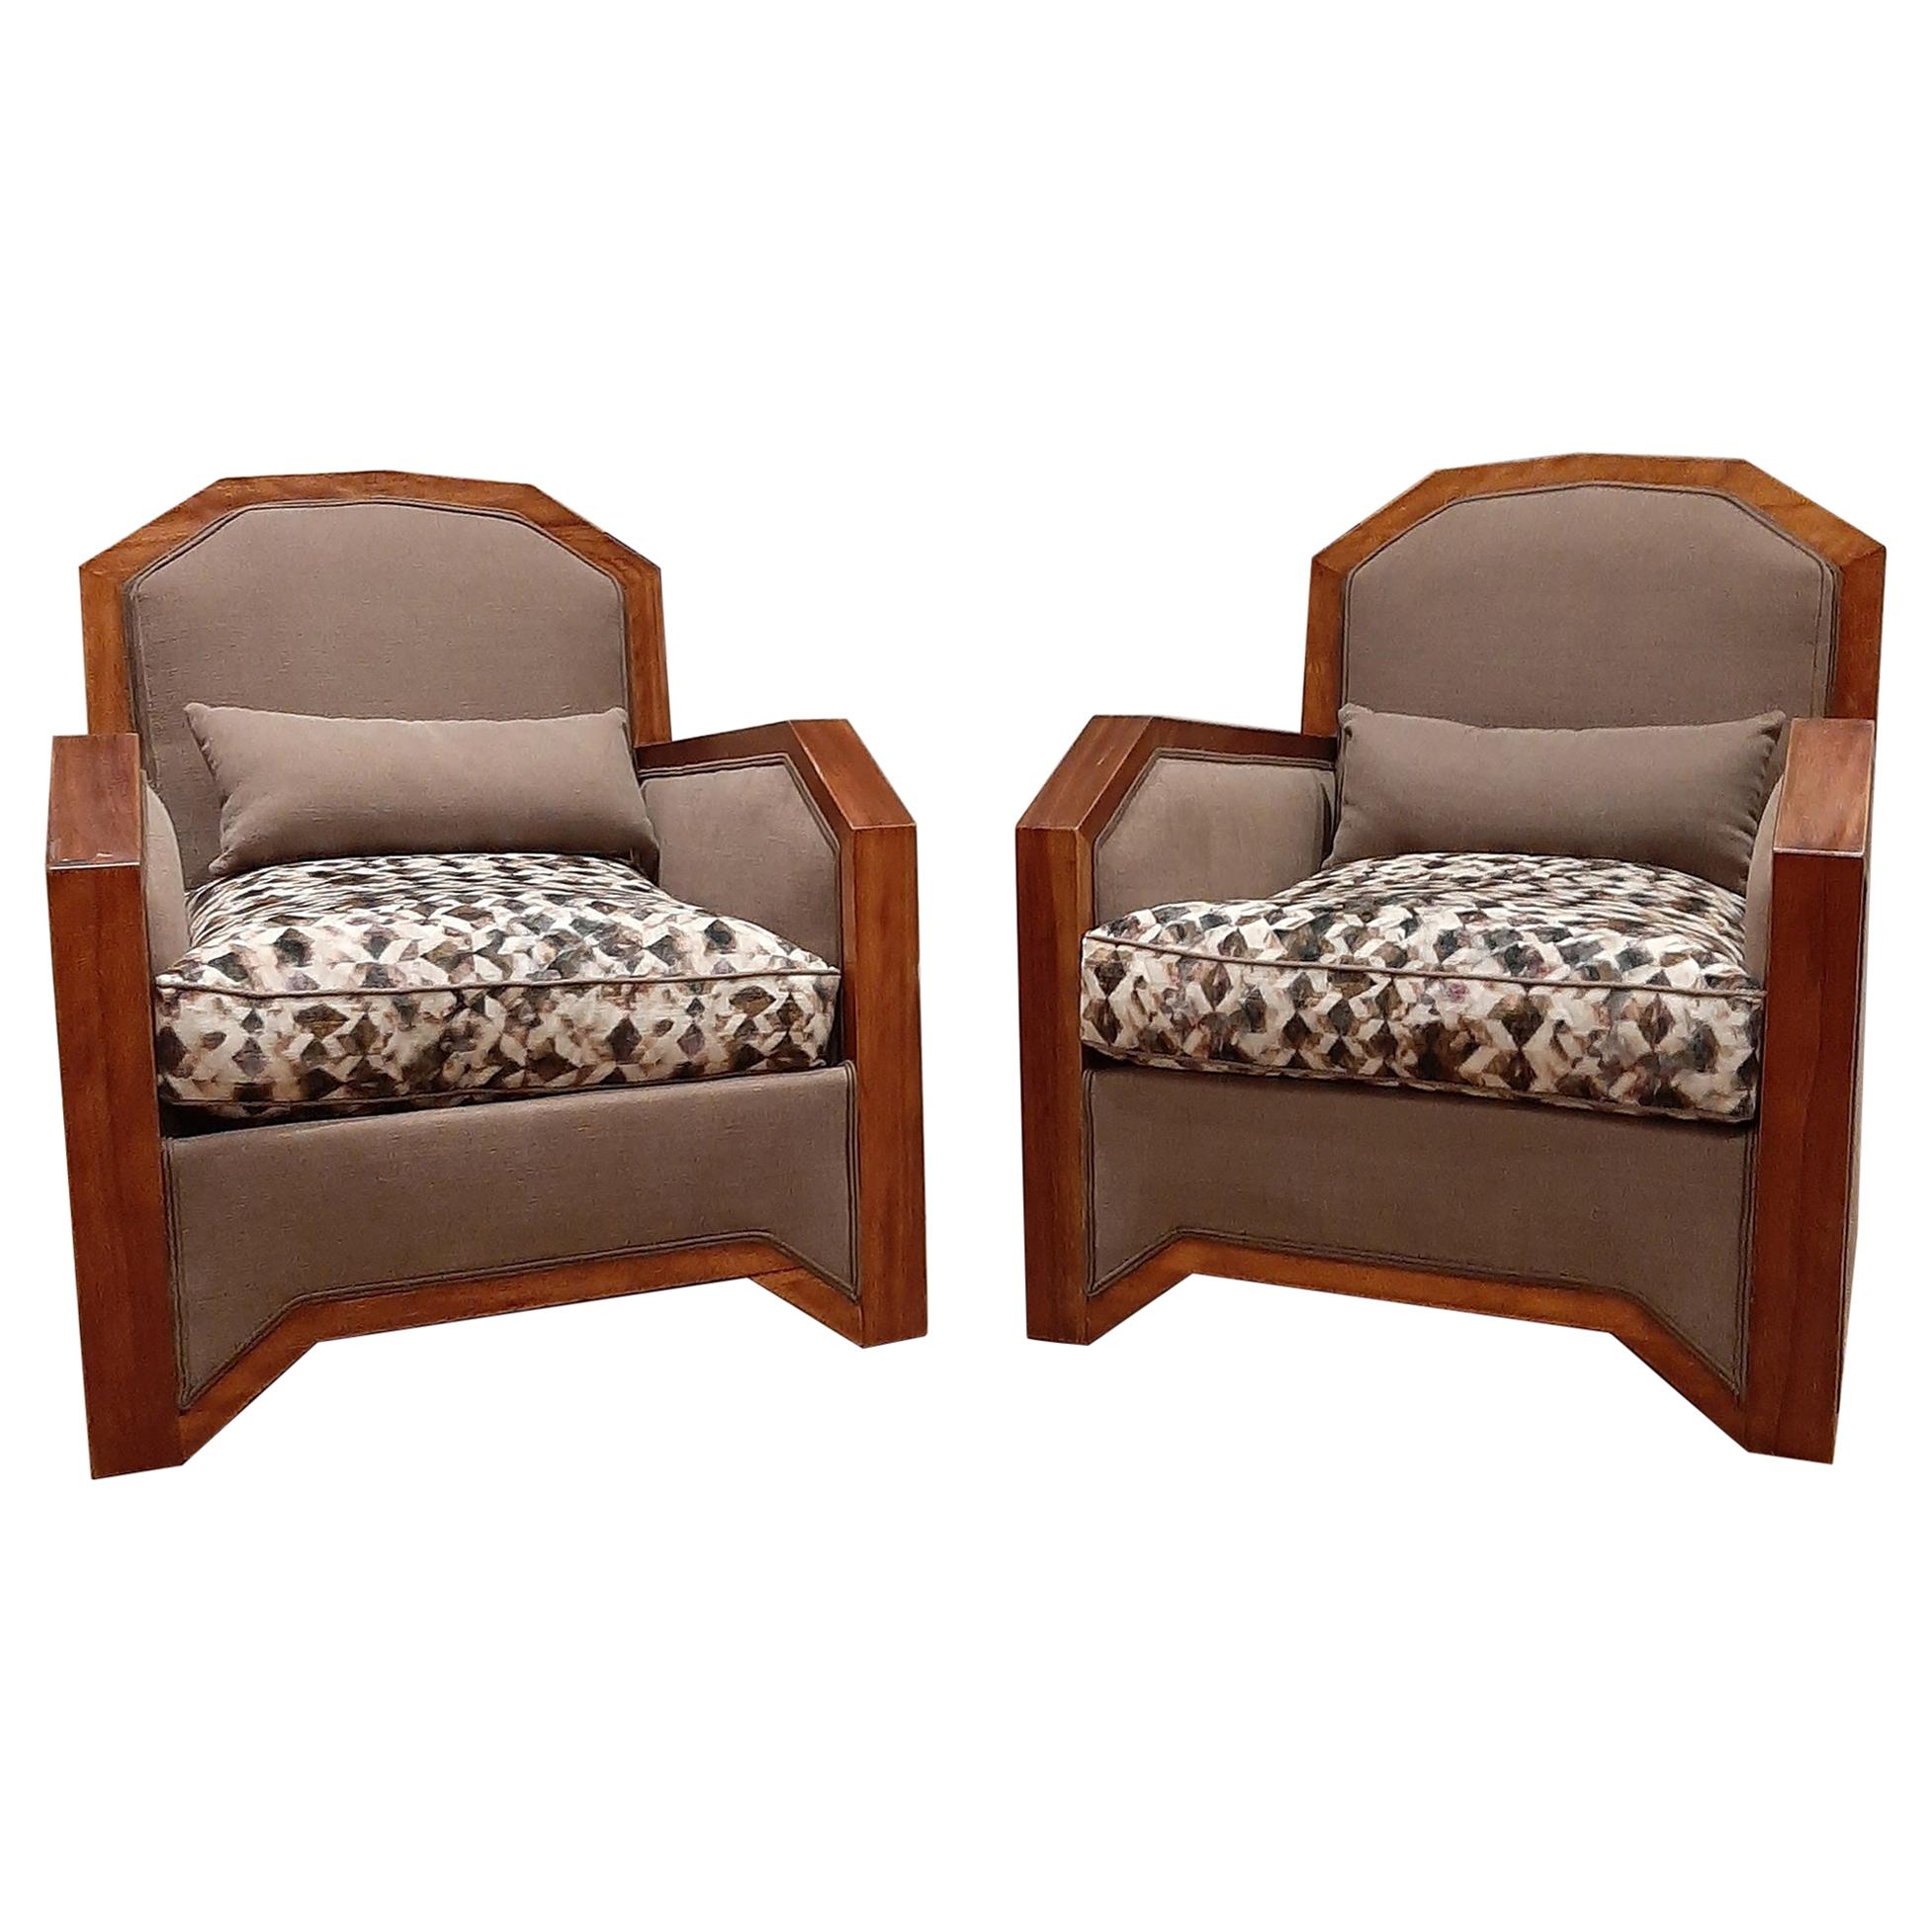 Pair of Upholstered French Art Deco Armchairs, 1930s